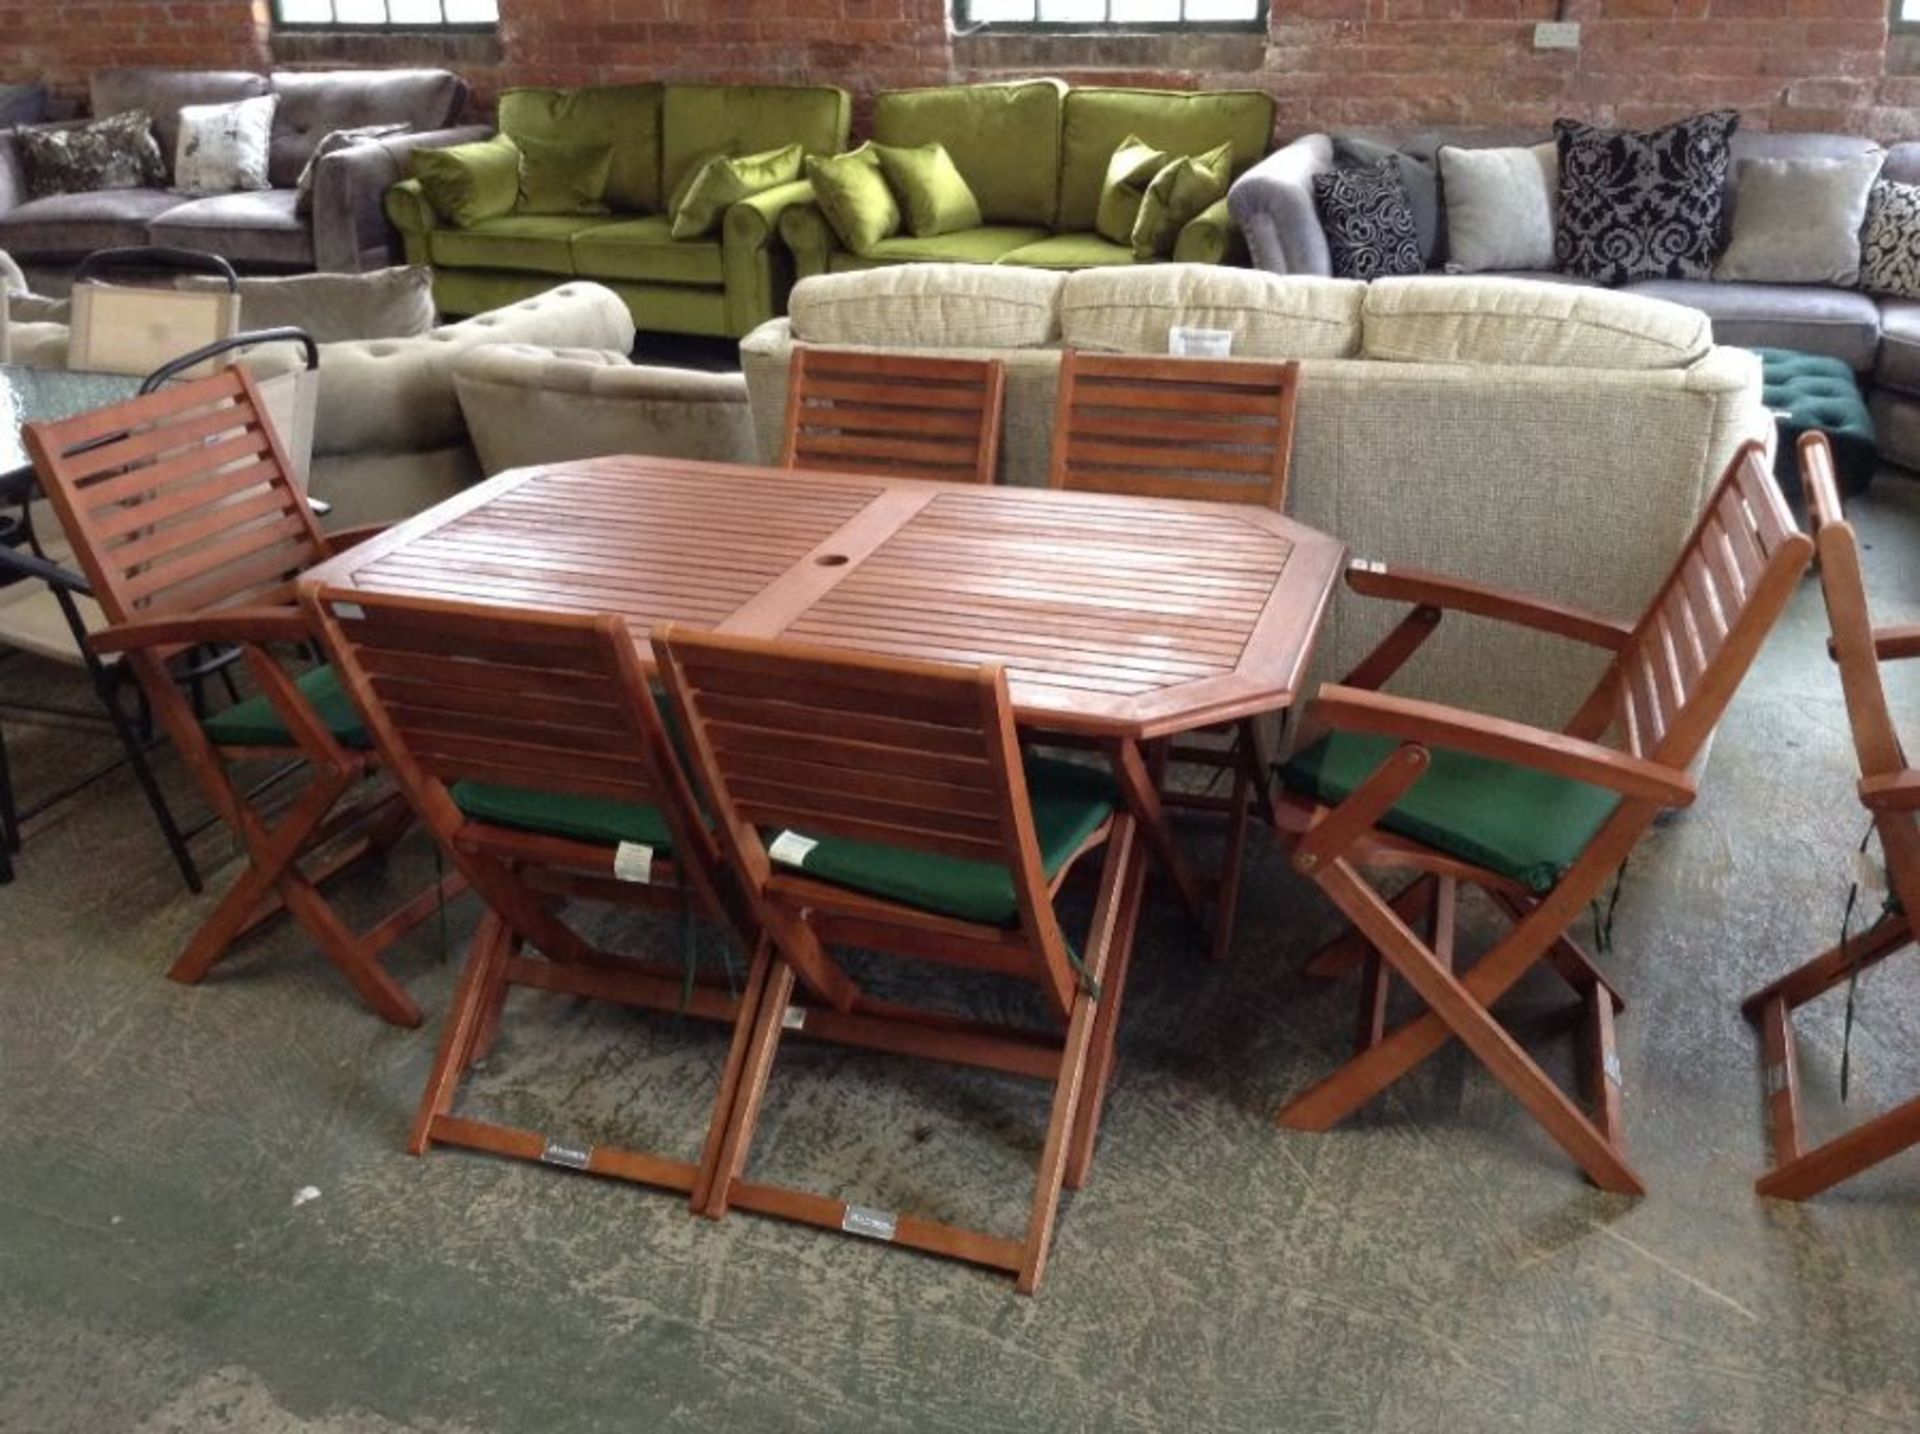 WOODEN GARDEN TABLE AND 6 CHAIRS (23688/5 22688/12